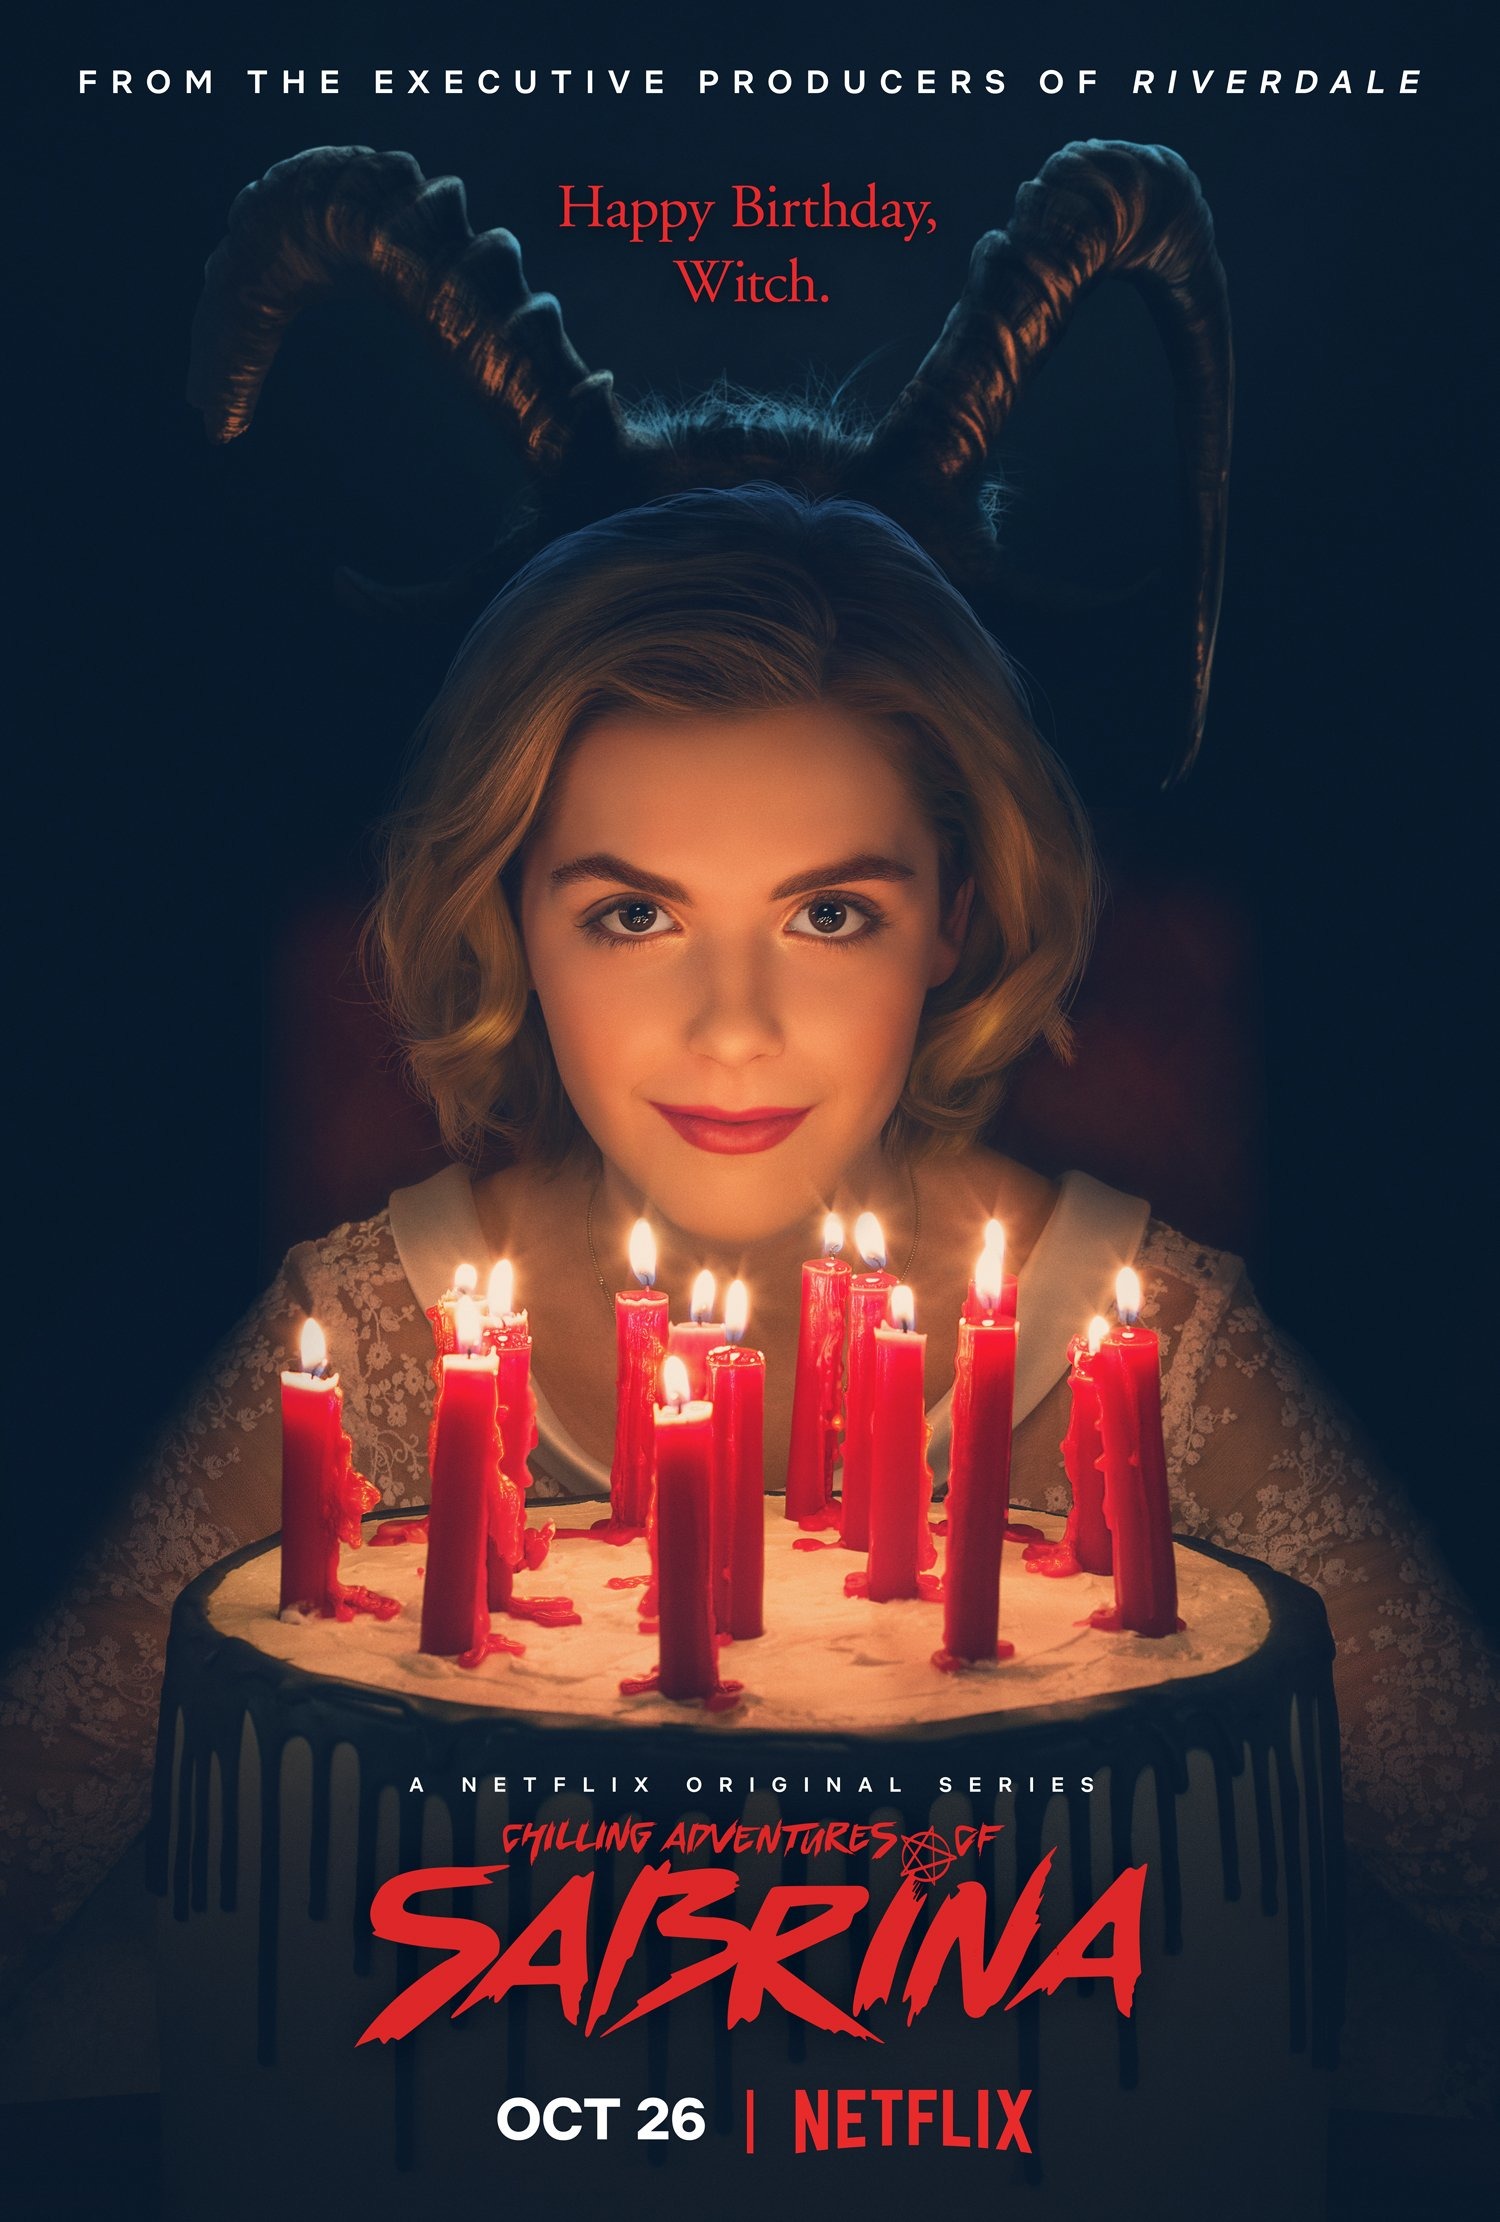 Mega Sized TV Poster Image for Chilling Adventures of Sabrina (#2 of 8)